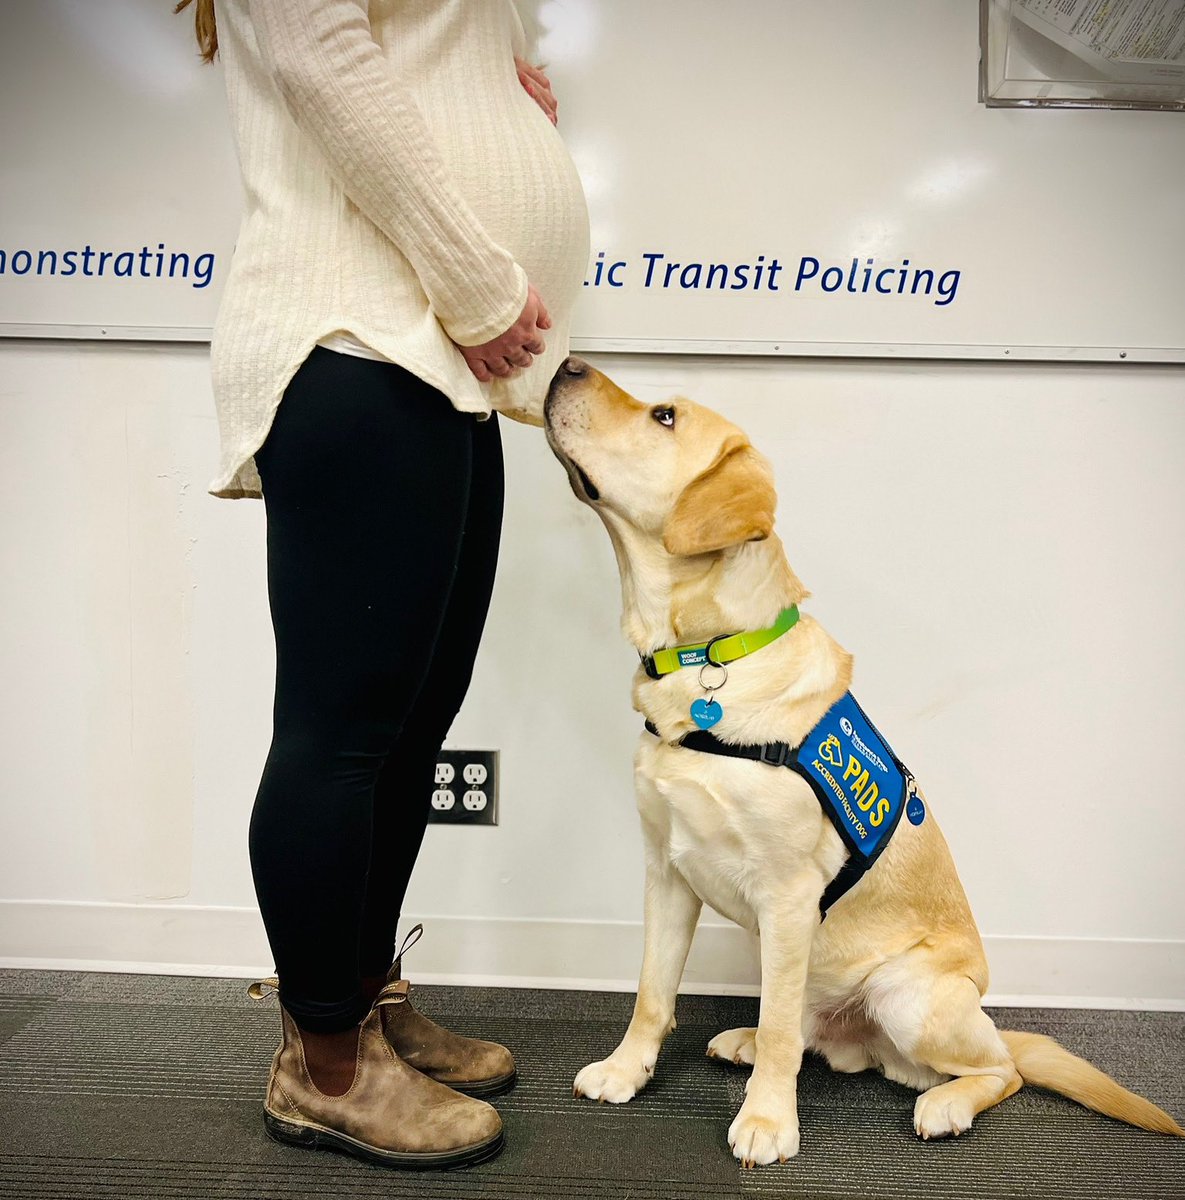 My job is to look after all the @transitpolicebc humans. Here I am checking on the human that’s still growing in a transit police detective’s belly #workingdog #policedog #Labrador #goldenlab #babybump #pregnancy #policeofficer #womeninlawenforcement  @BCWLECanada @MVTPK9